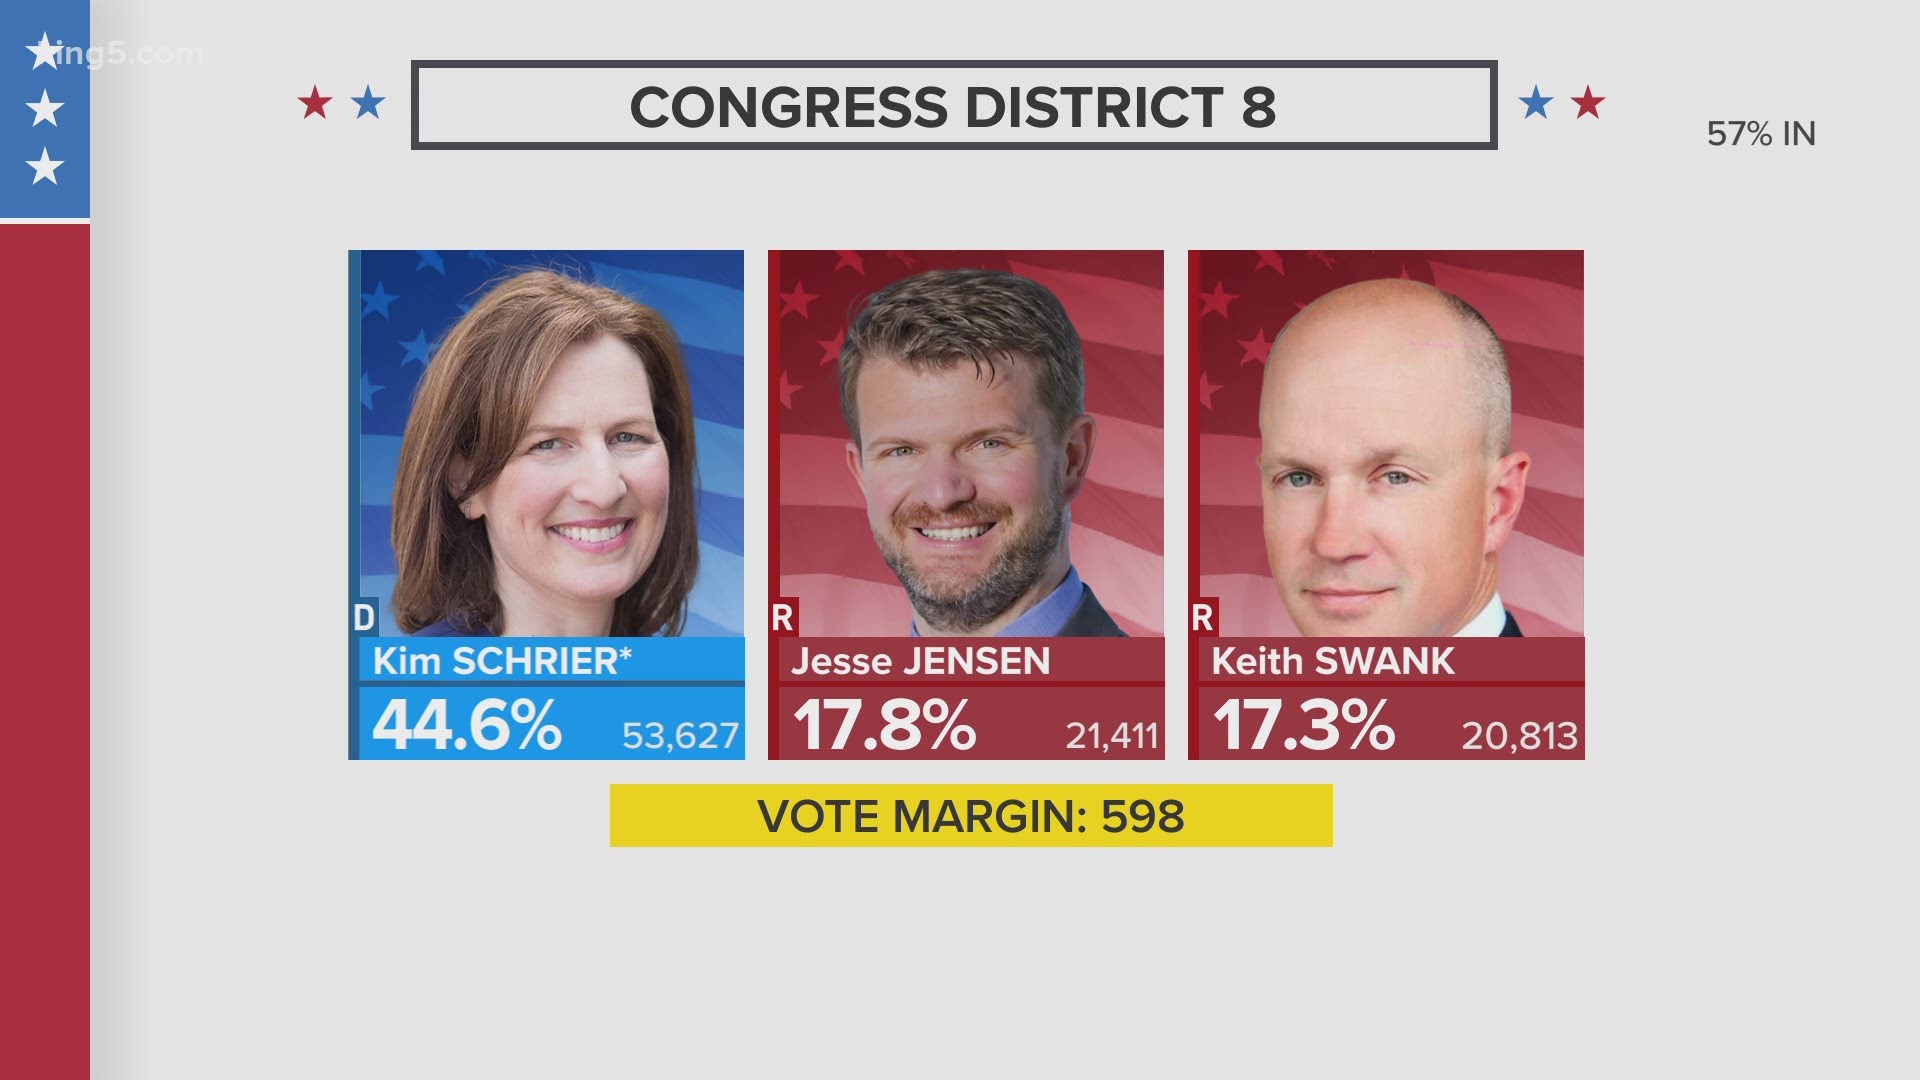 Incumbent Kim Schrier is leading in early returns with 45% of the vote.